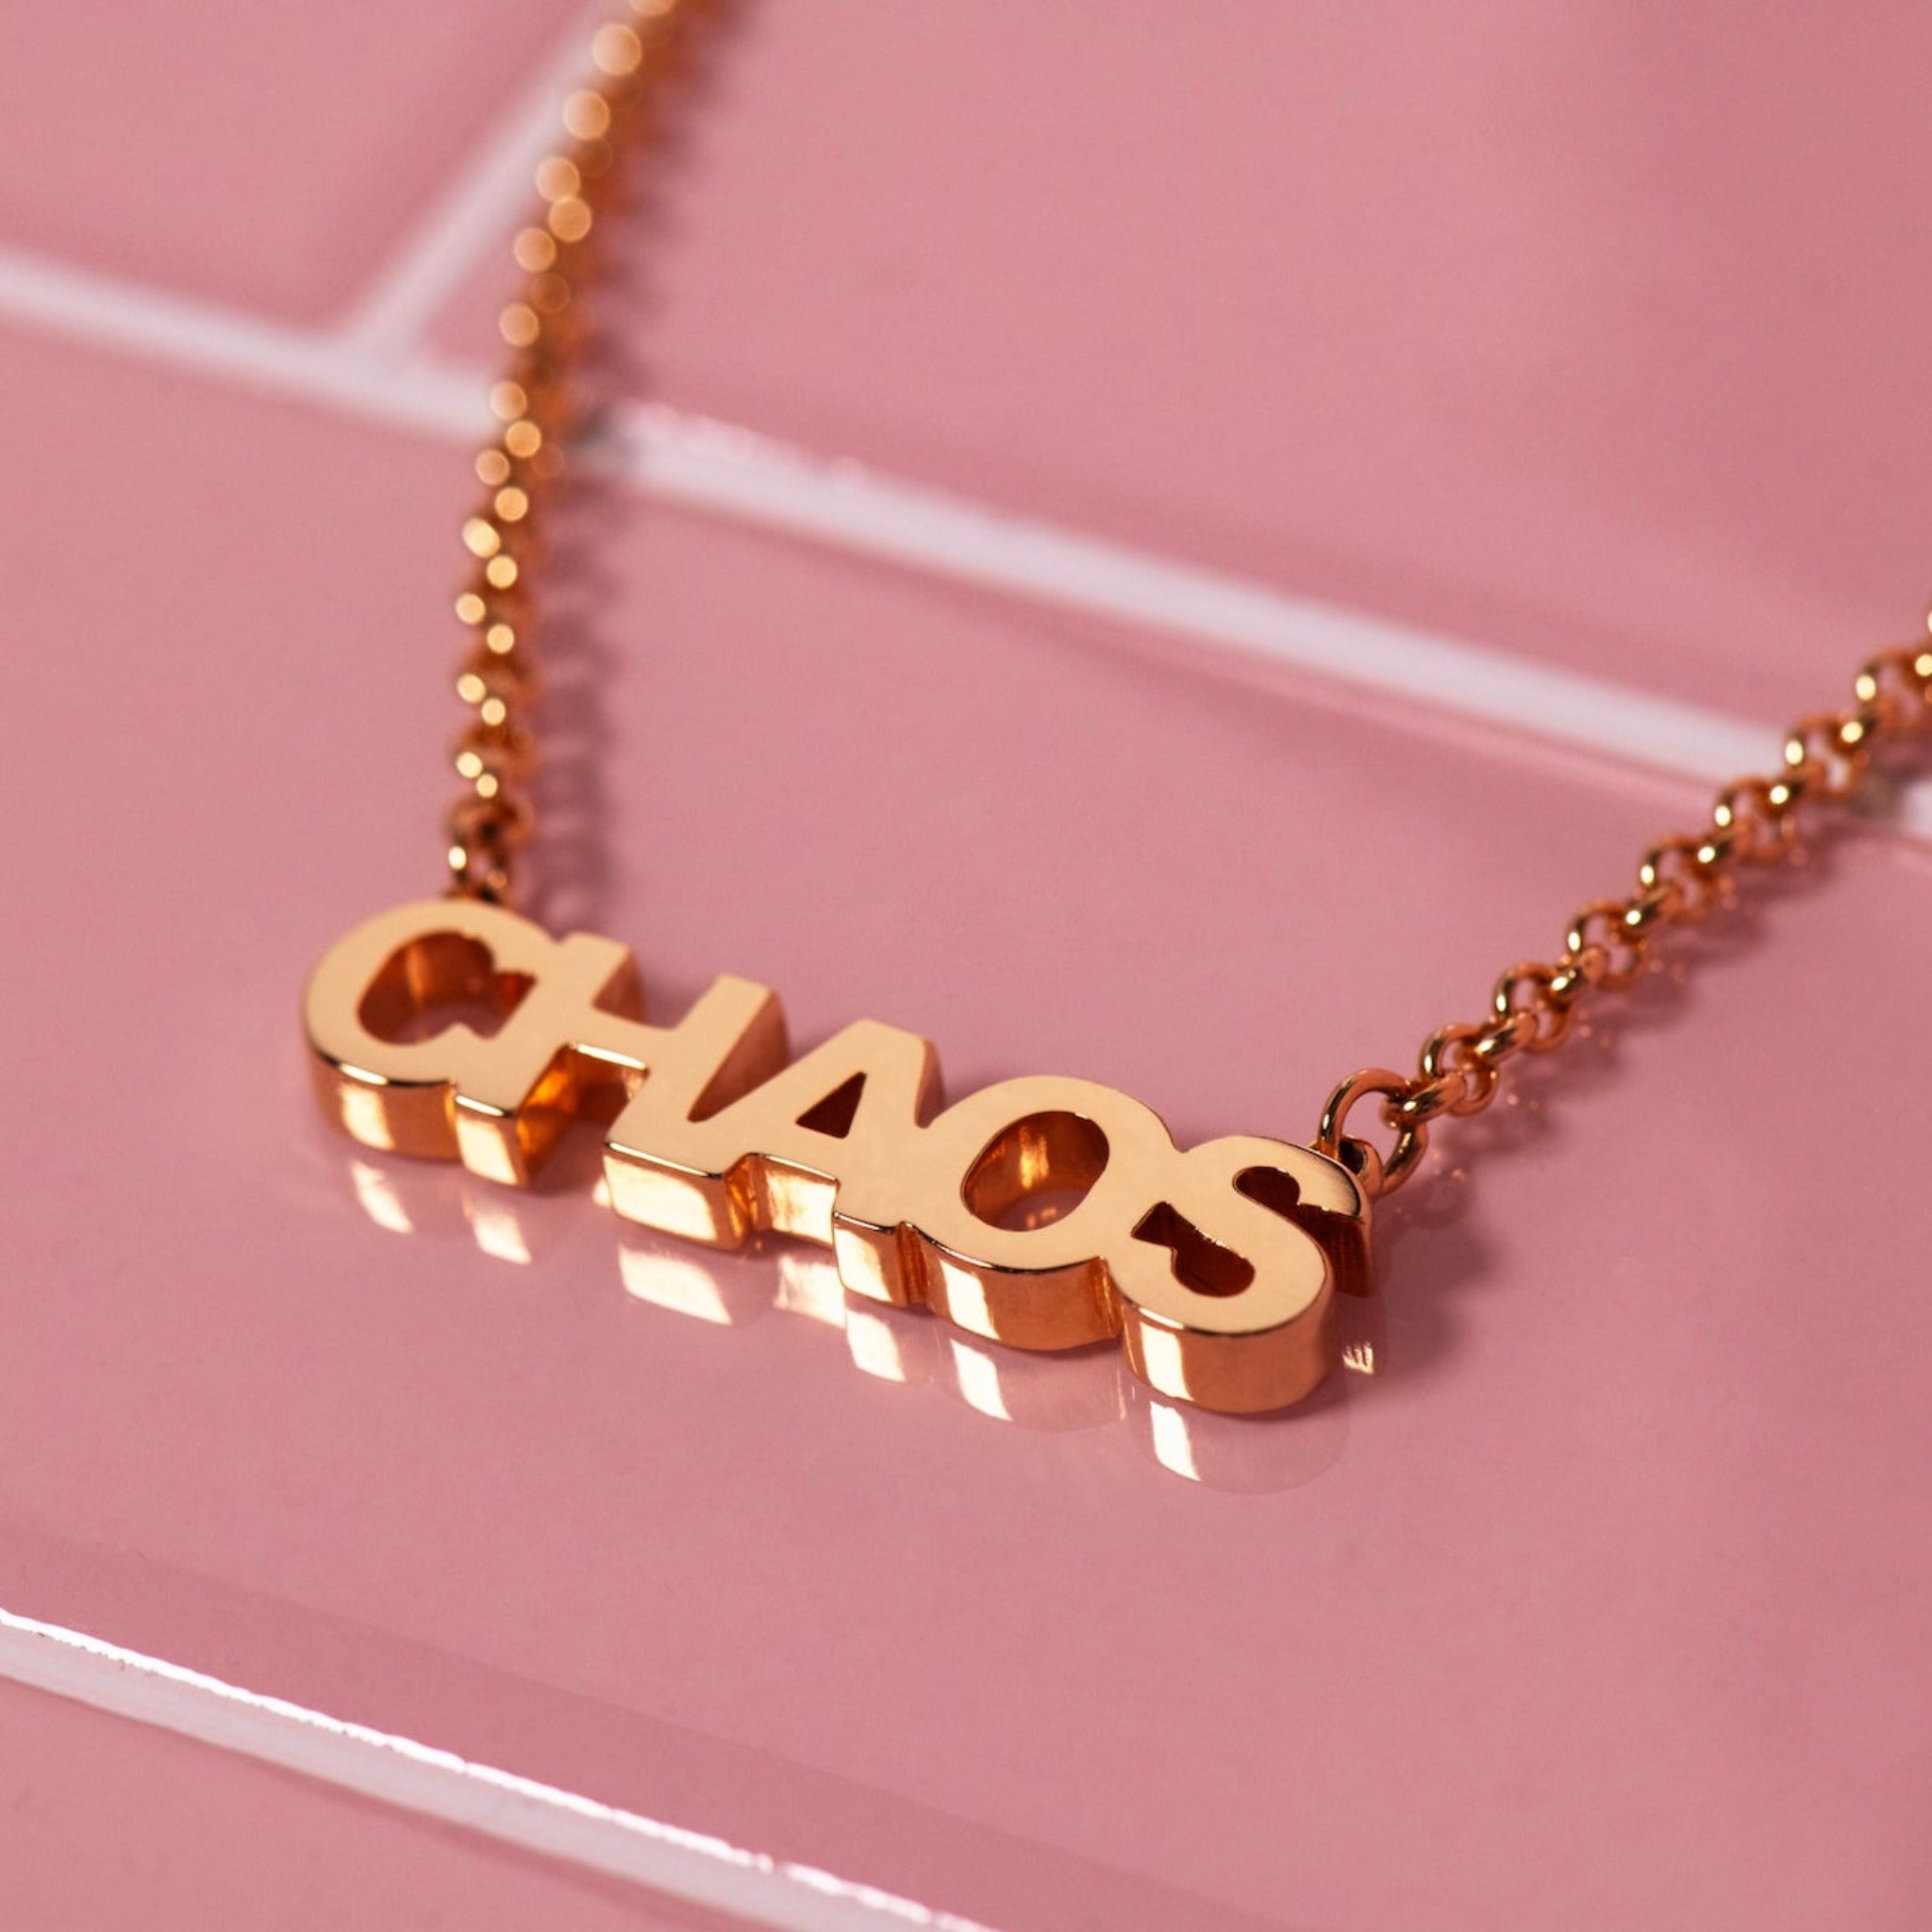 CHAOS NECKLACE